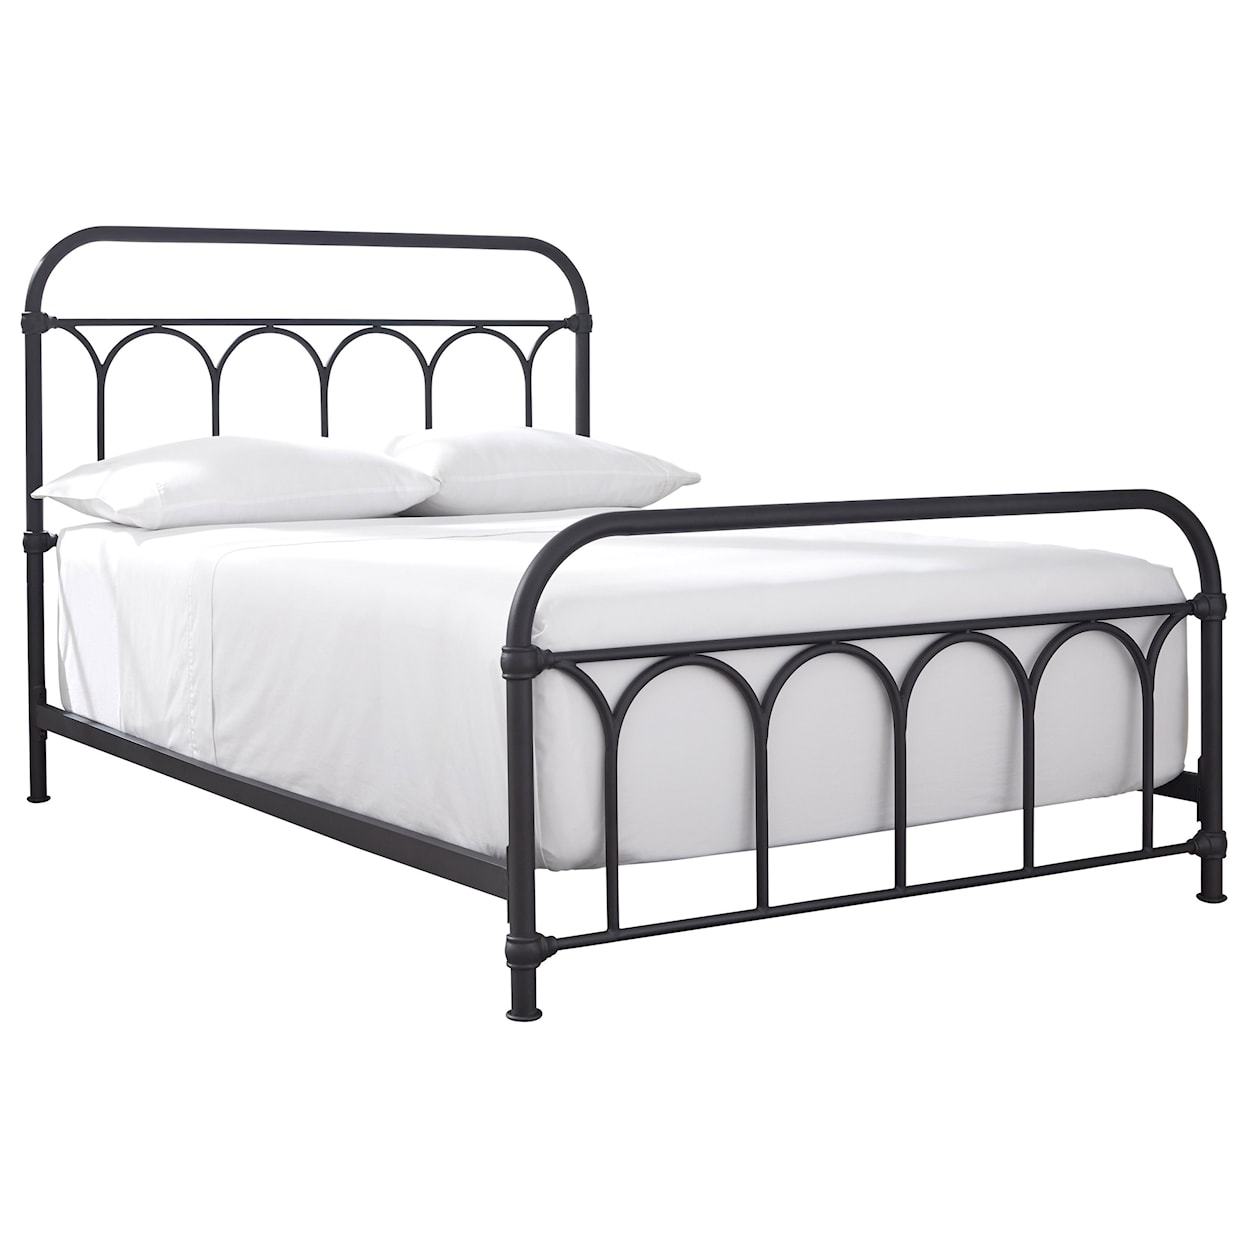 Signature Design by Ashley Nashburg B280-681 Casual Metal Queen Bed ...